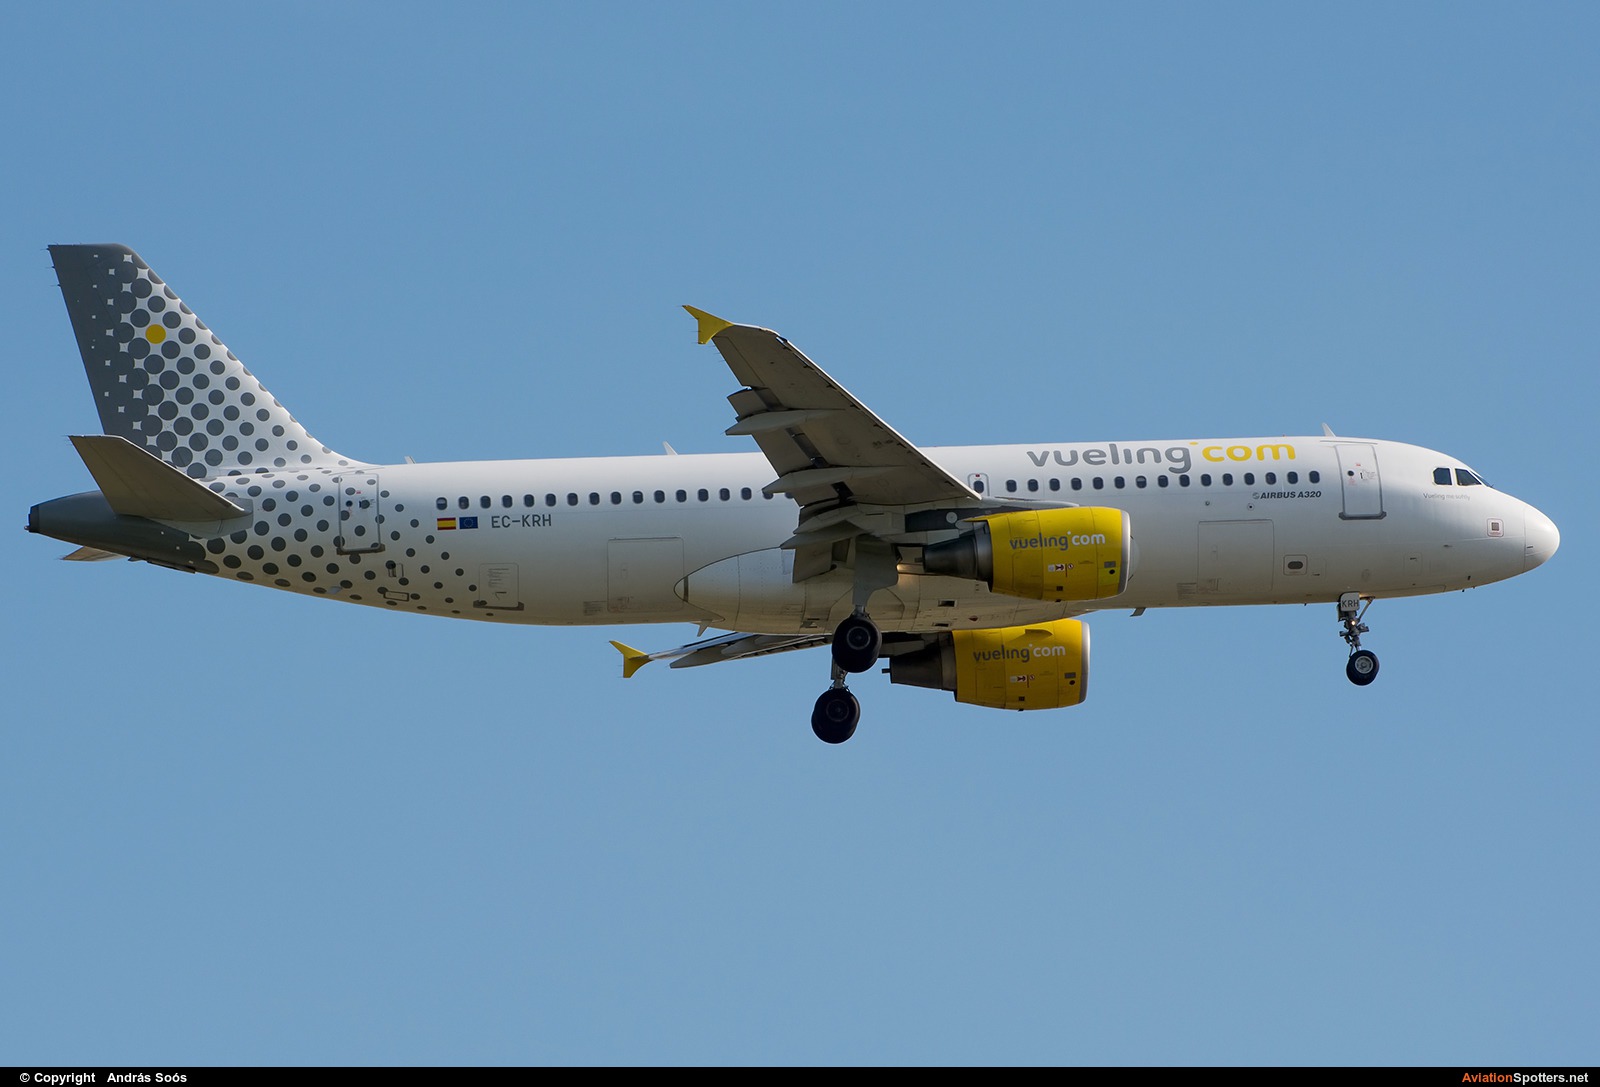 Vueling Airlines  -  A320-214  (EC-KRH) By András Soós (sas1965)